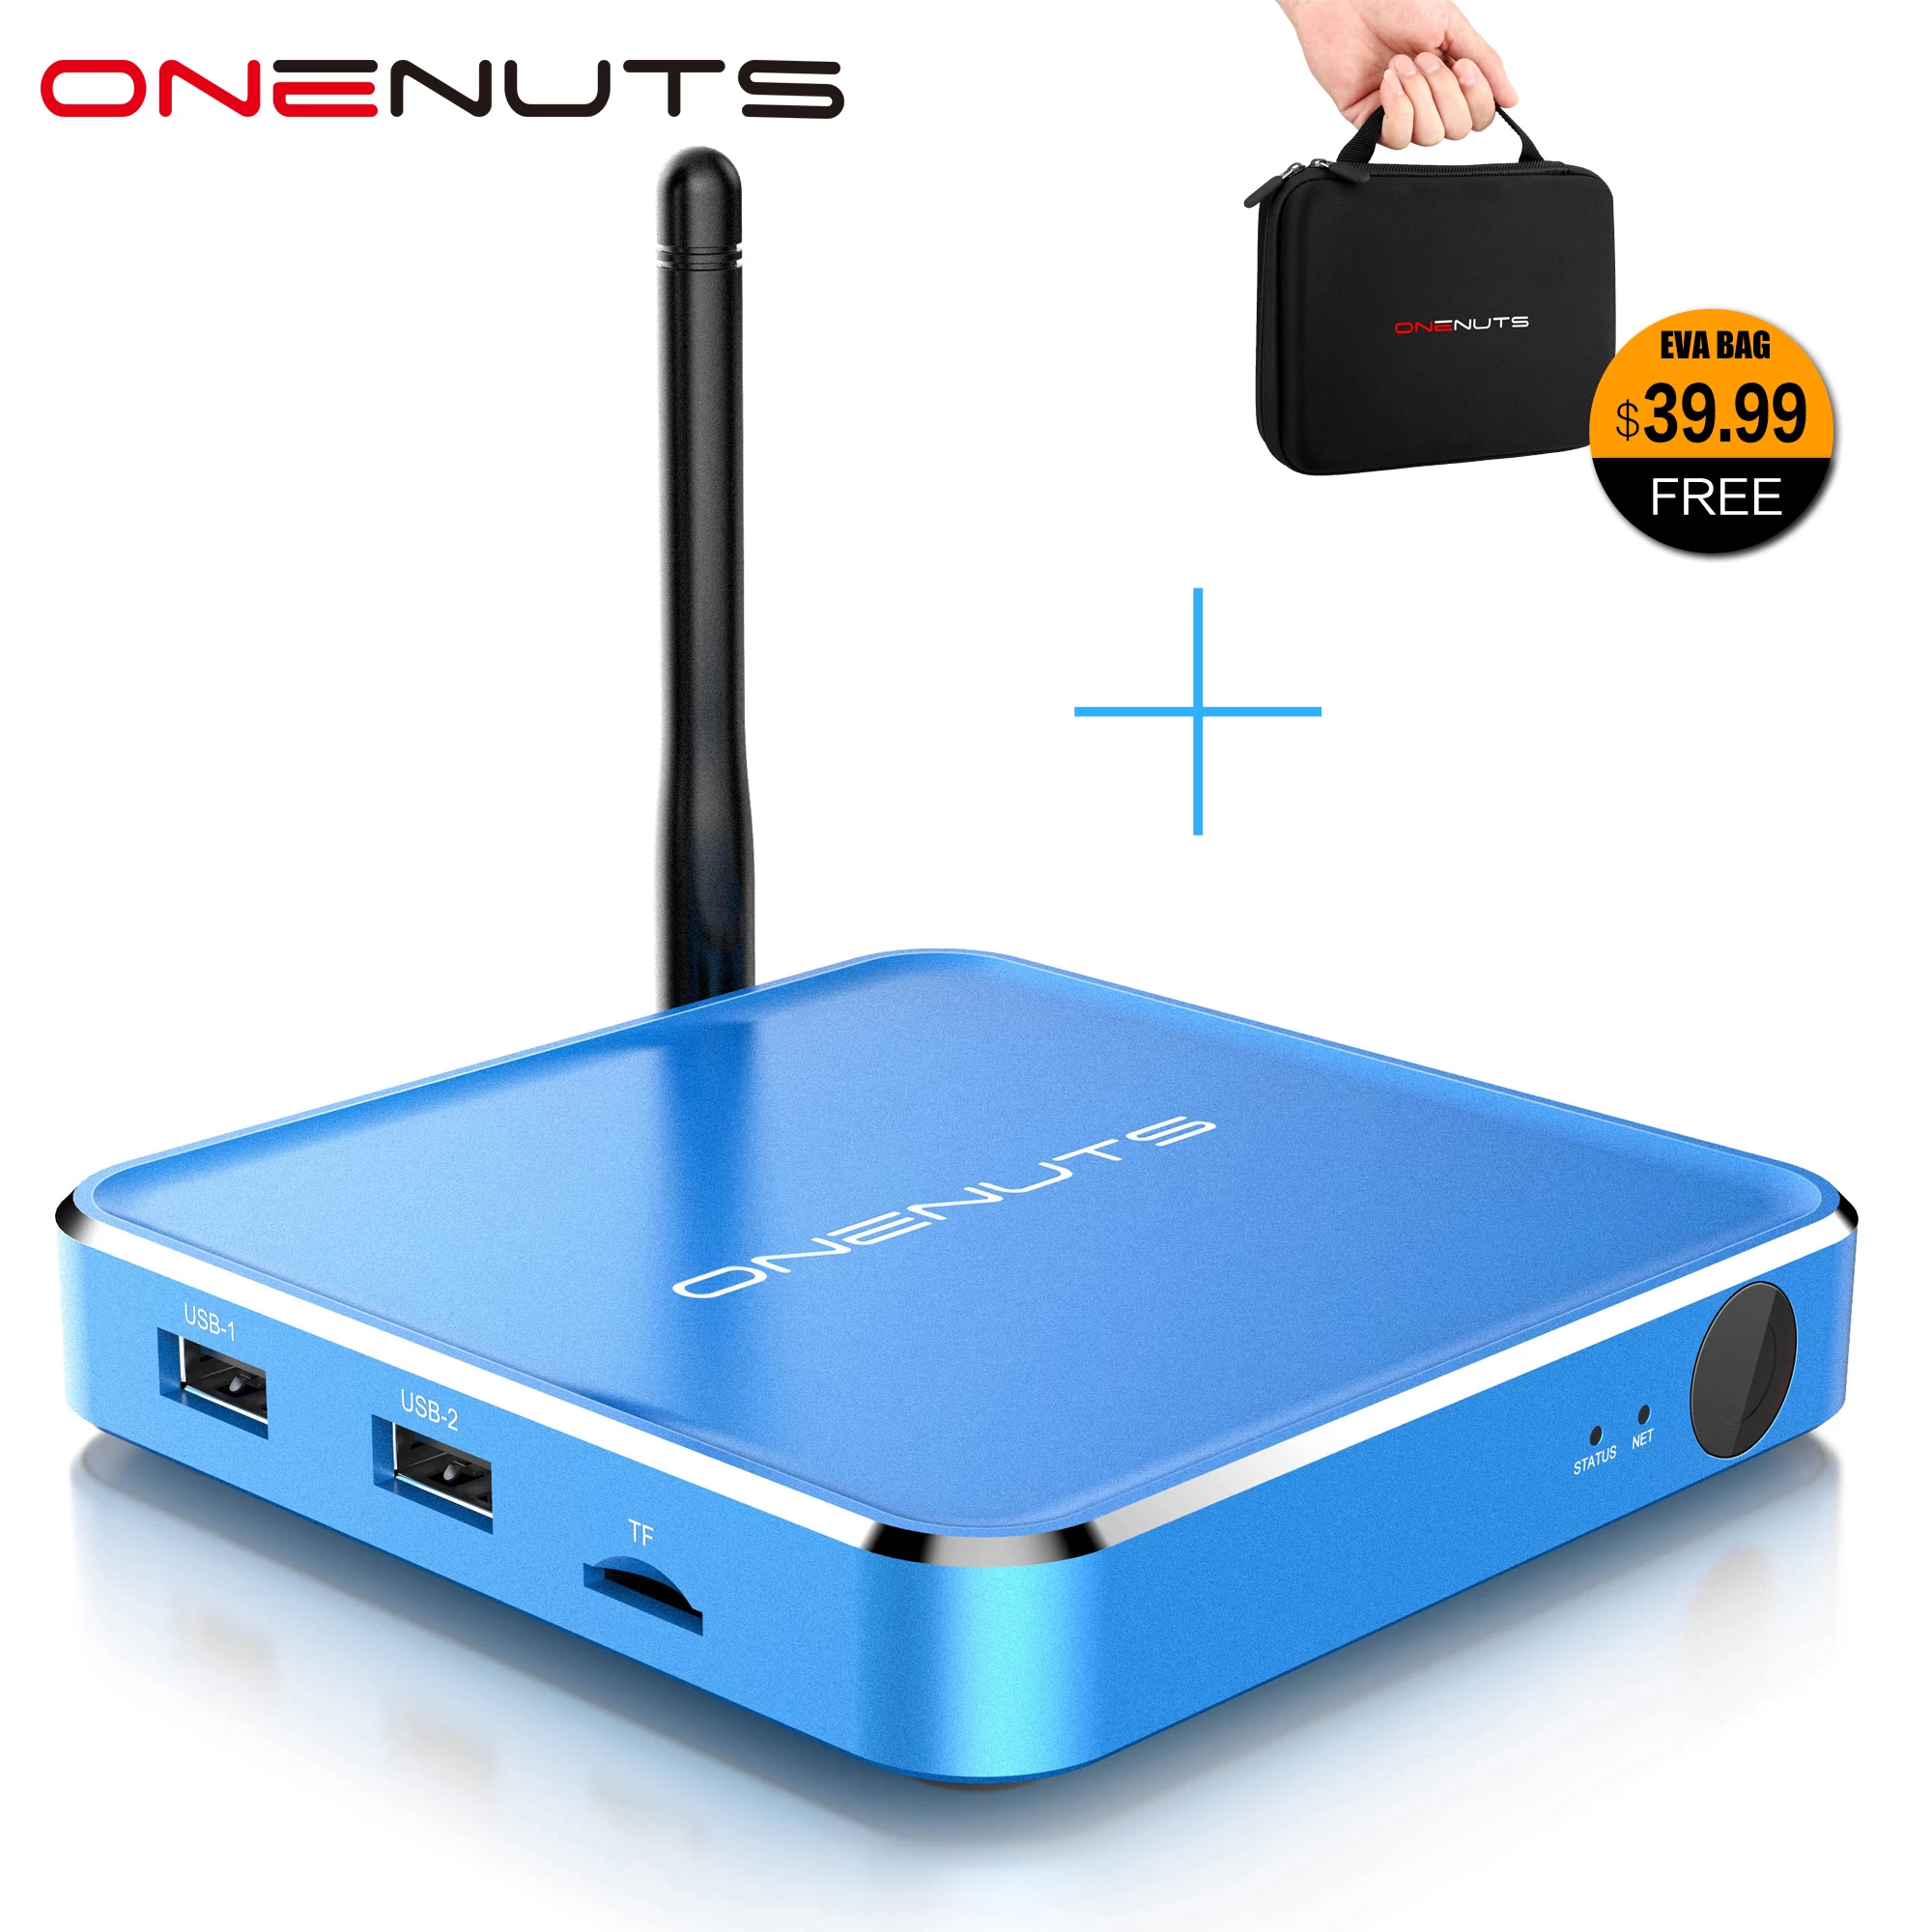 Android TV Box Dualband AC WiFi, Android TV Box Gigabit Ethernet